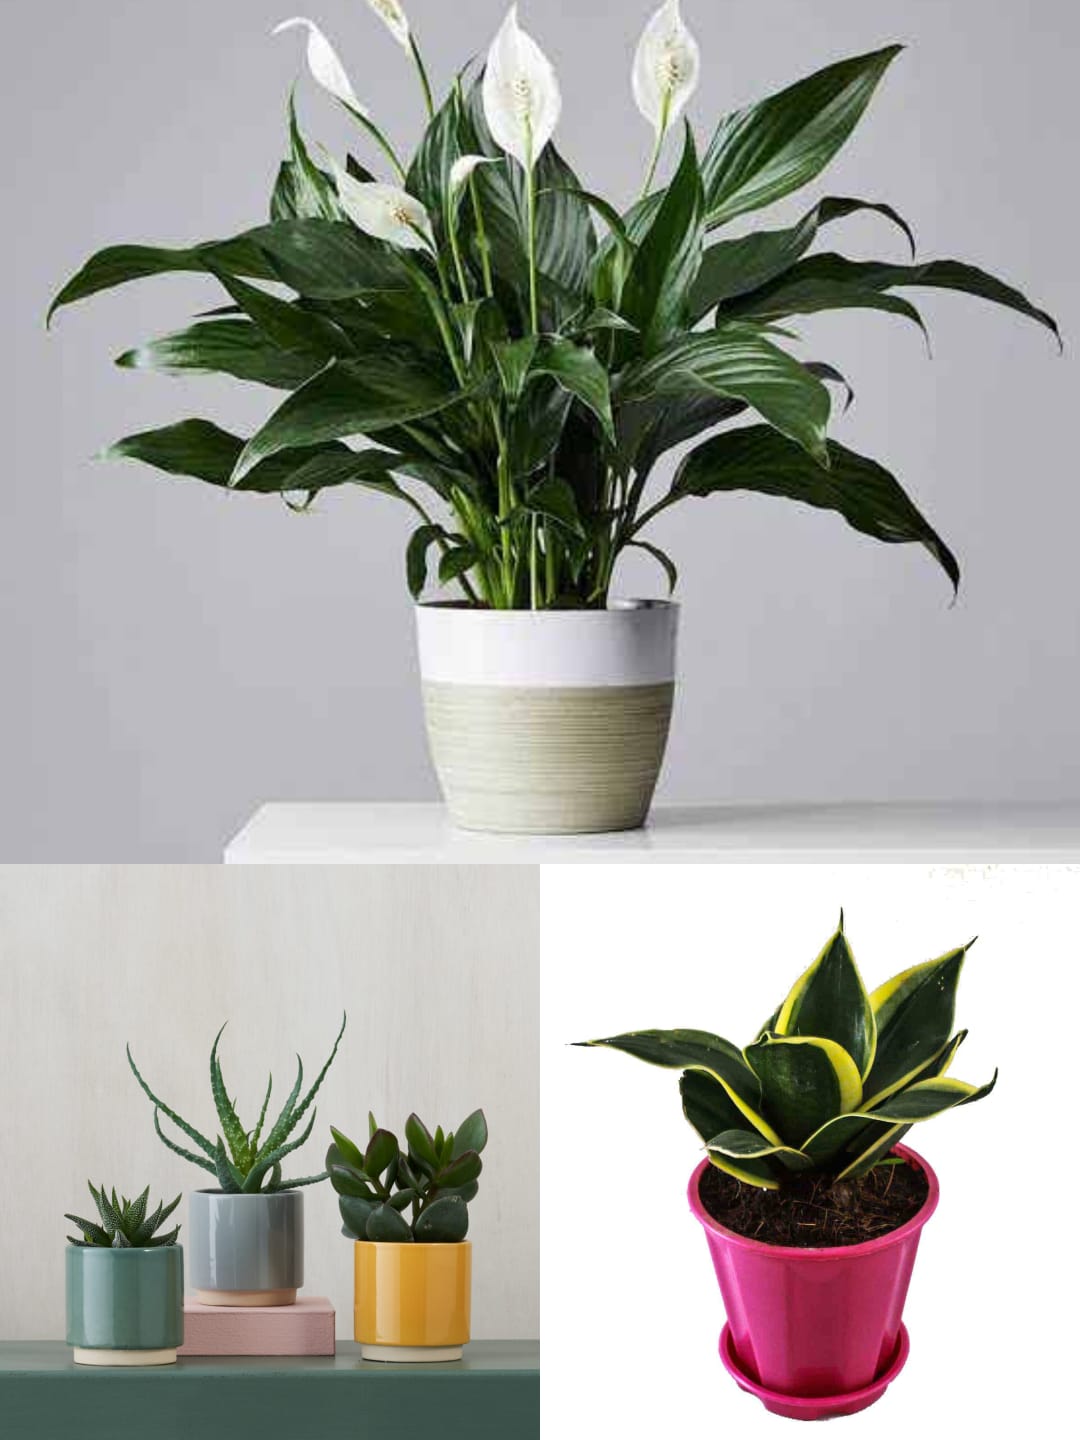 10 Indoor Plants That Are Perfect for Housewarming Gifts